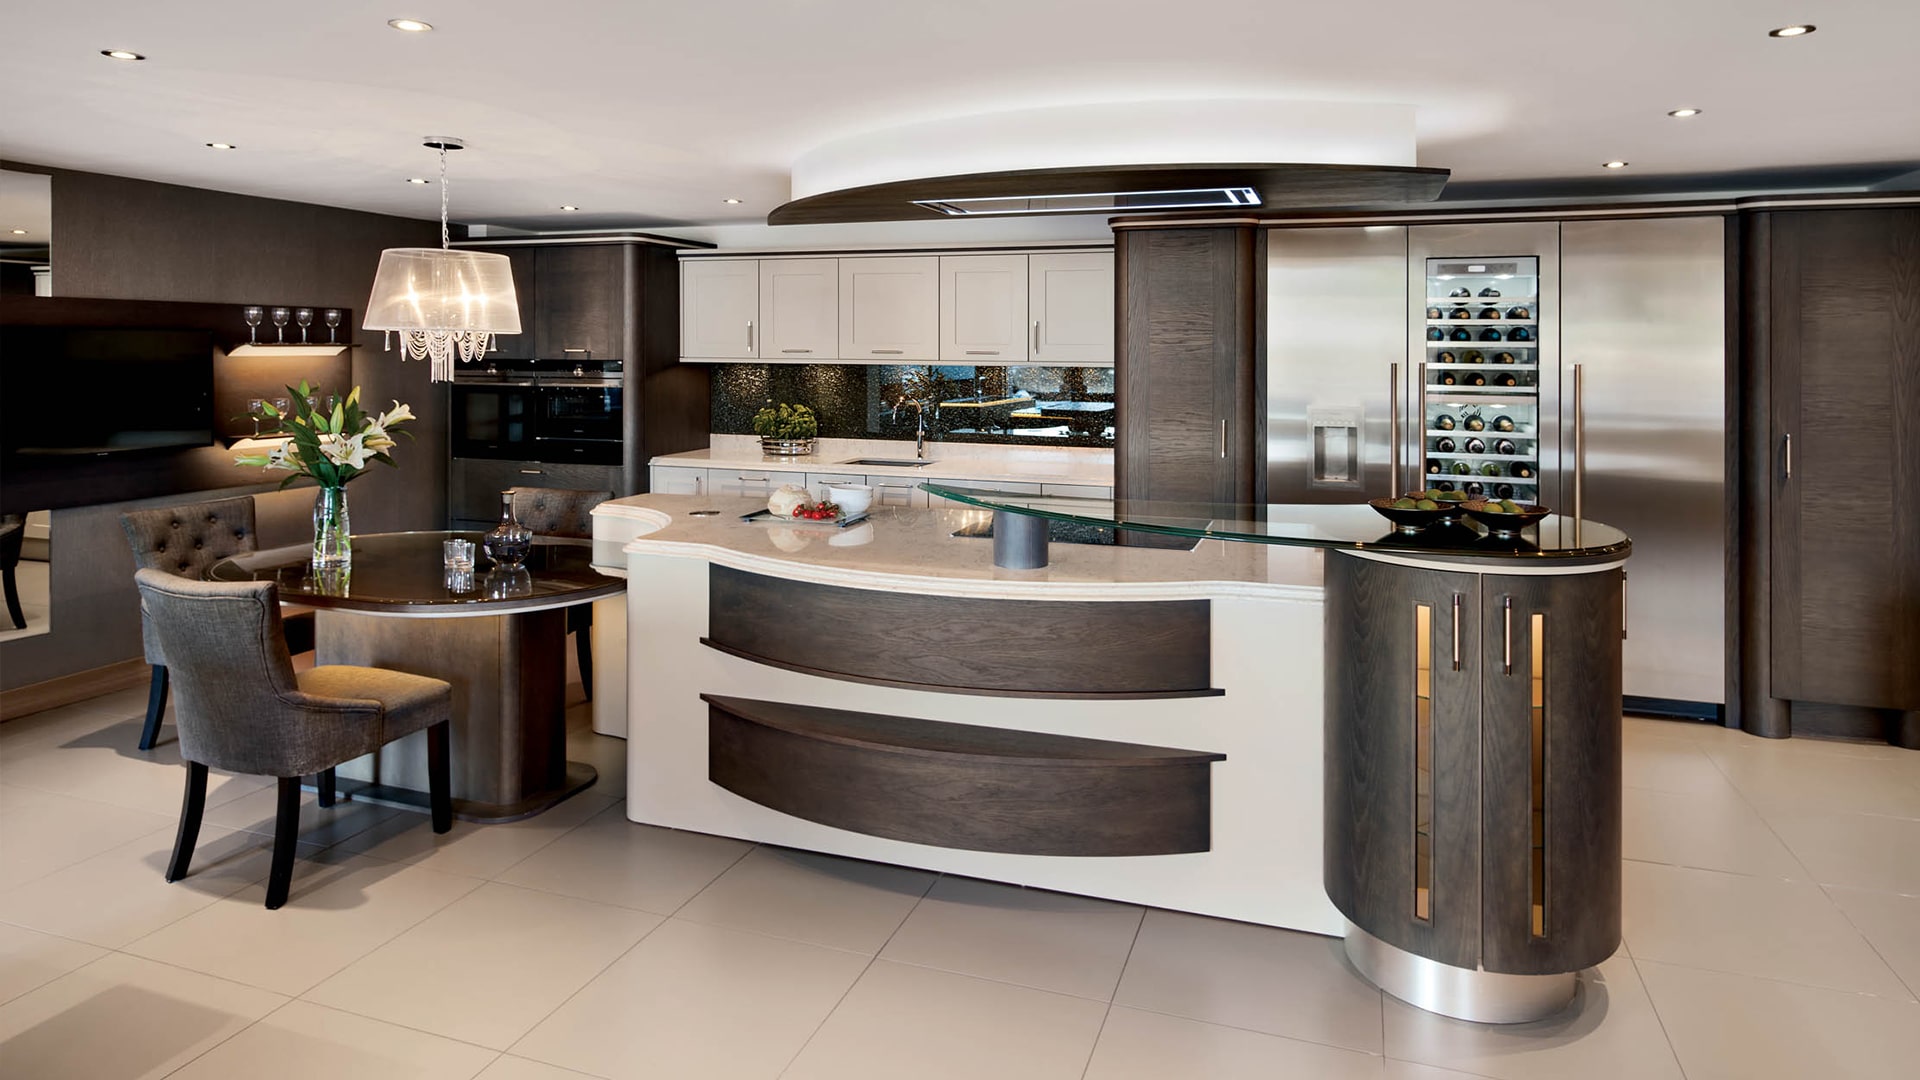 neutral-toned Callerton Kitchens by J.S. Geddes featuring light beige units and dark wooden finishes